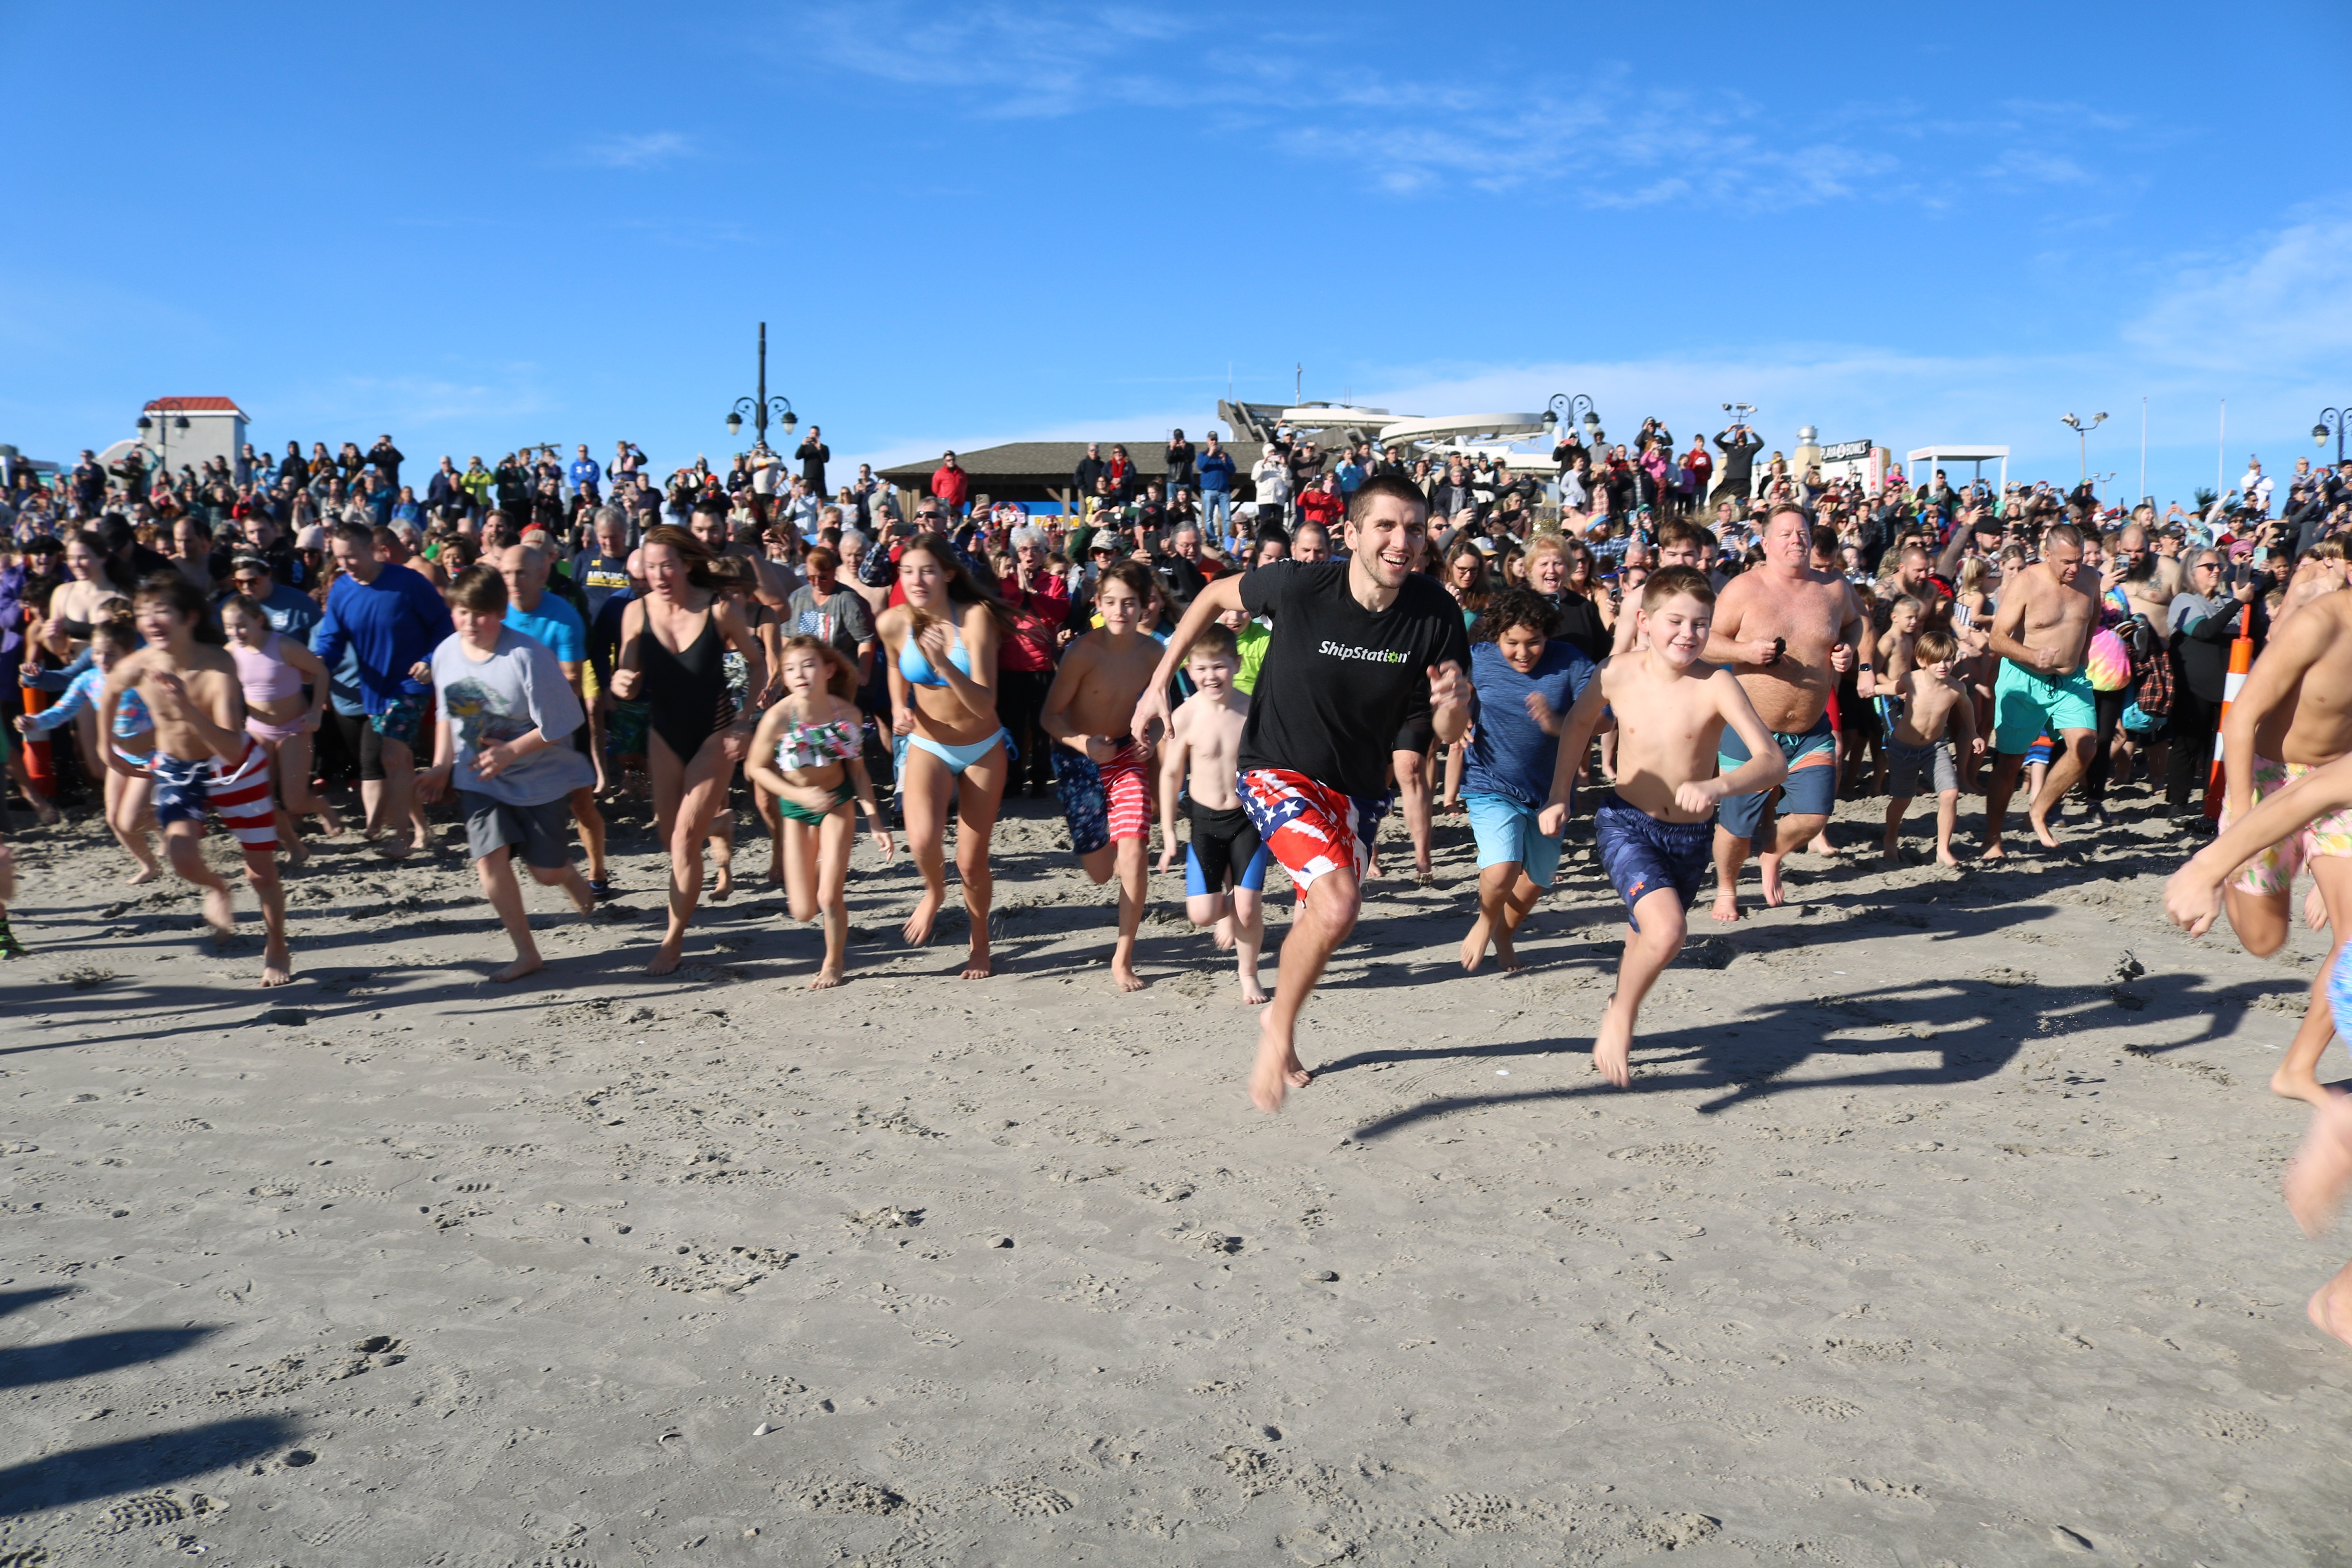 Ocean City Revelers “Plunge” Into New Year